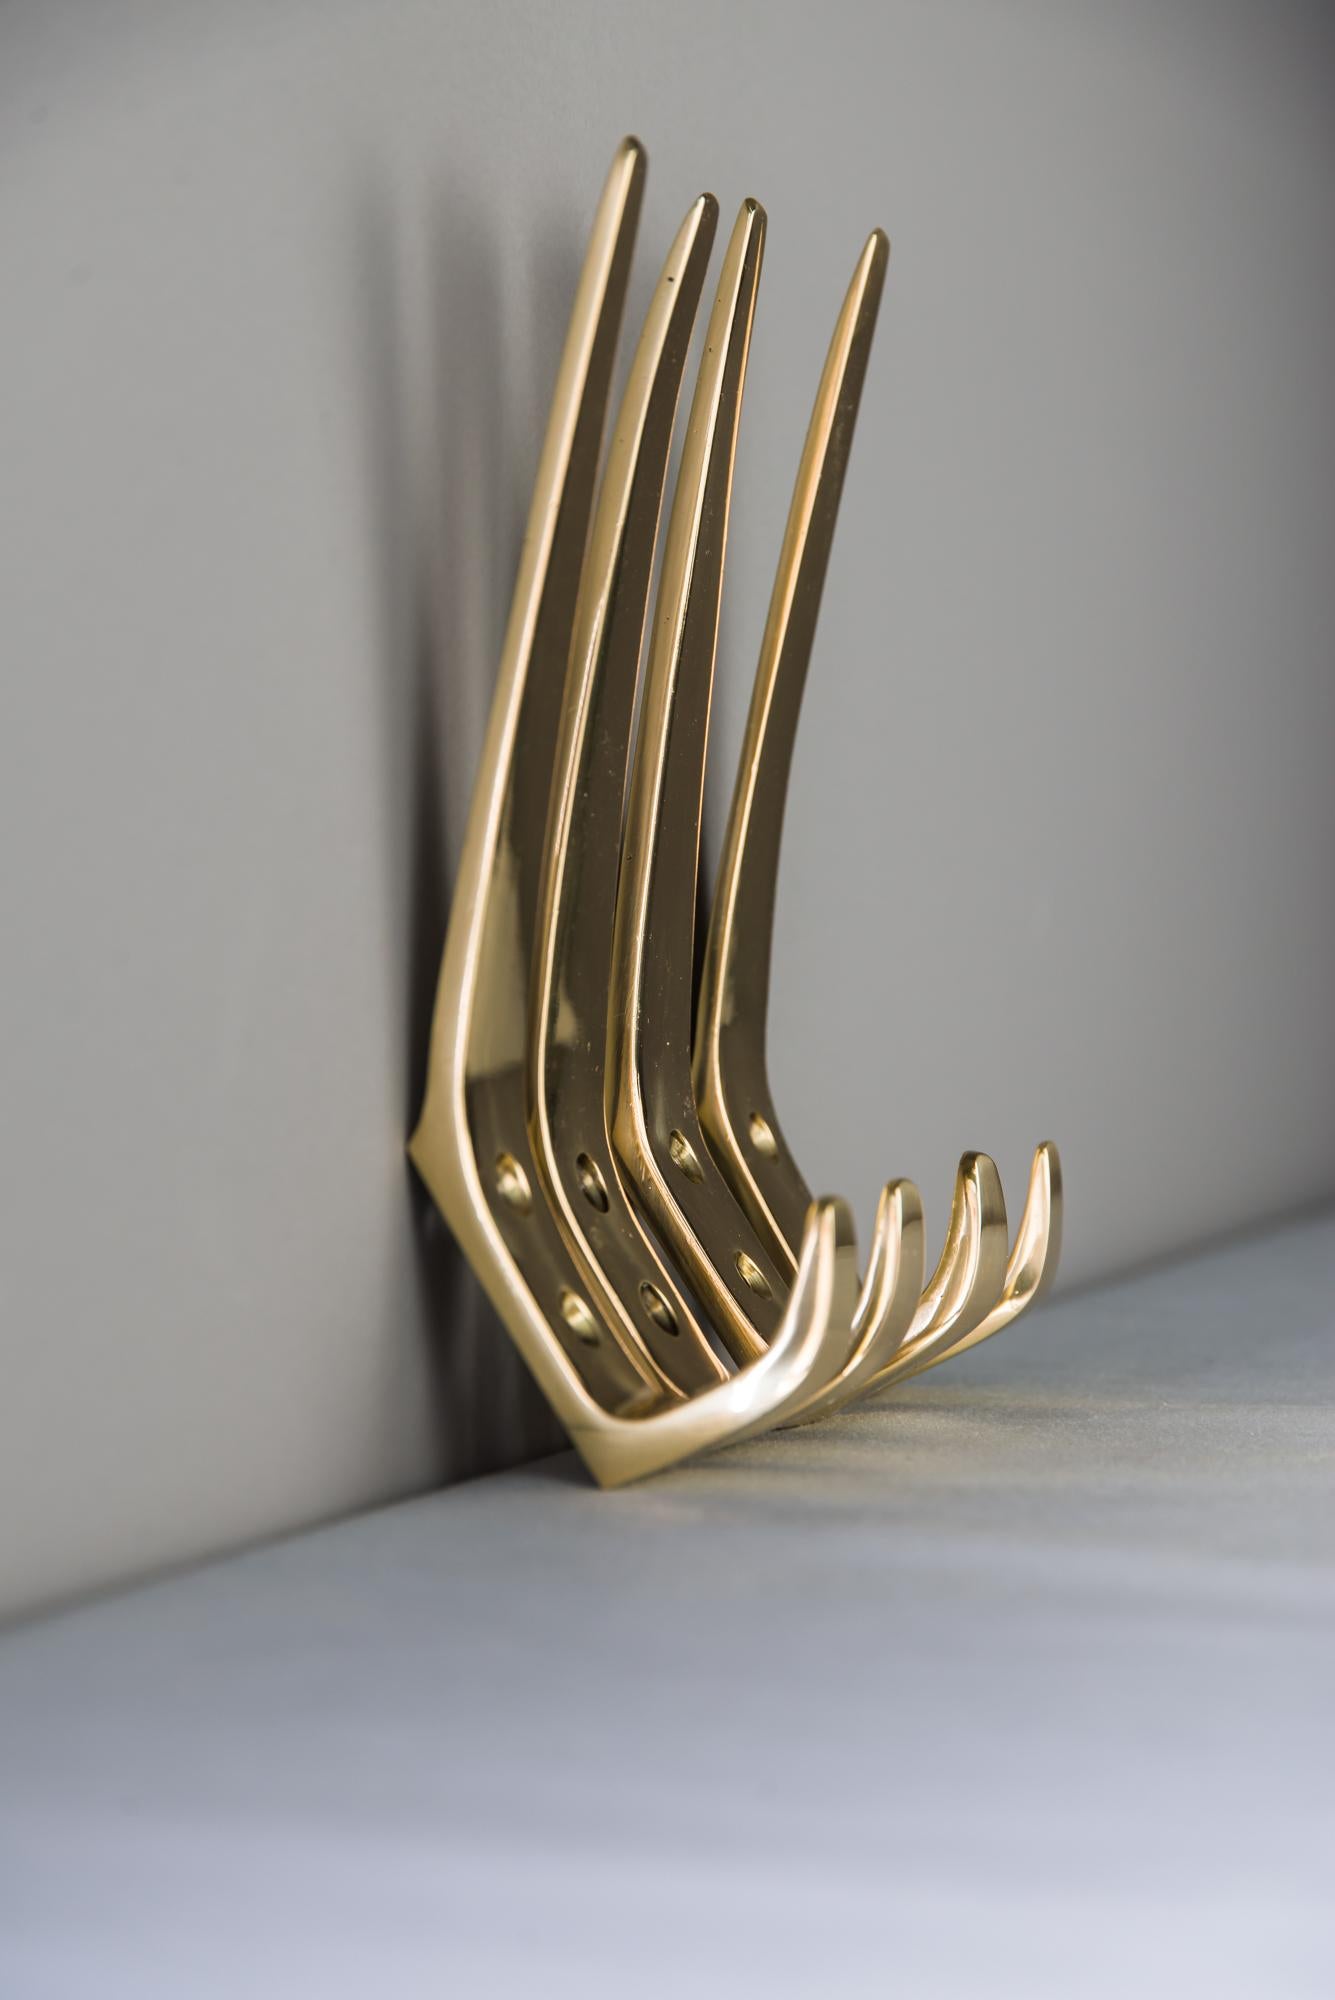 Lacquered Hagenauer Wall Hooks, circa 1950s